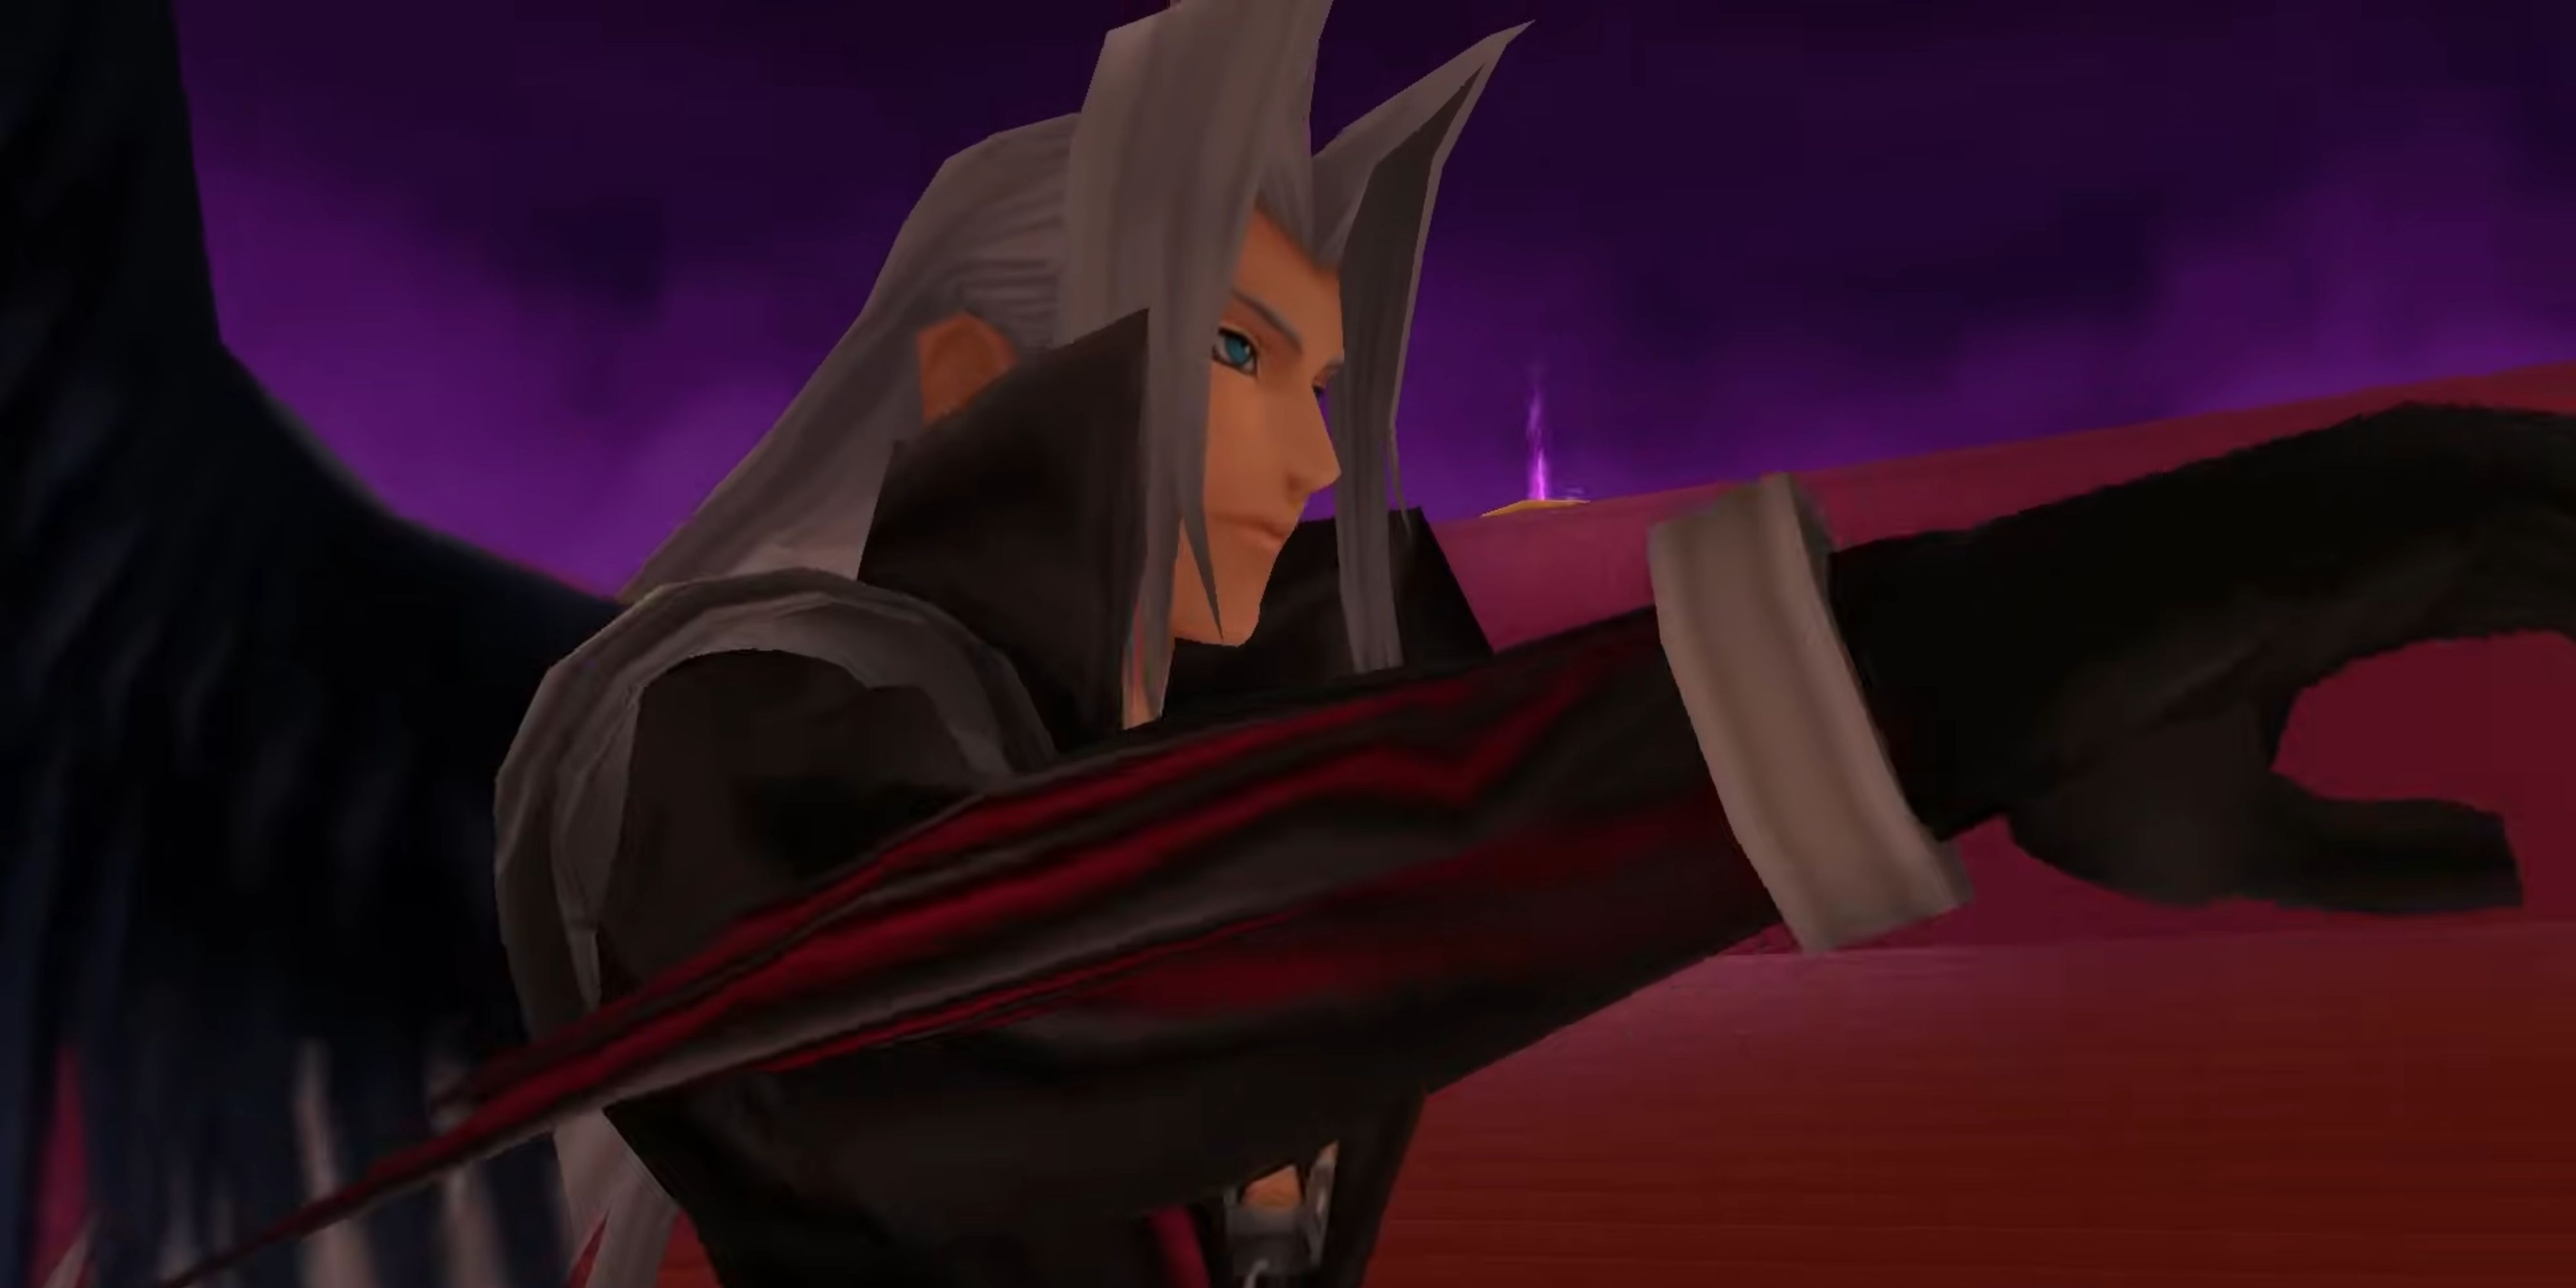 Sephiroth gets ready to fight Sora in the Coliseum's Platinum Match.